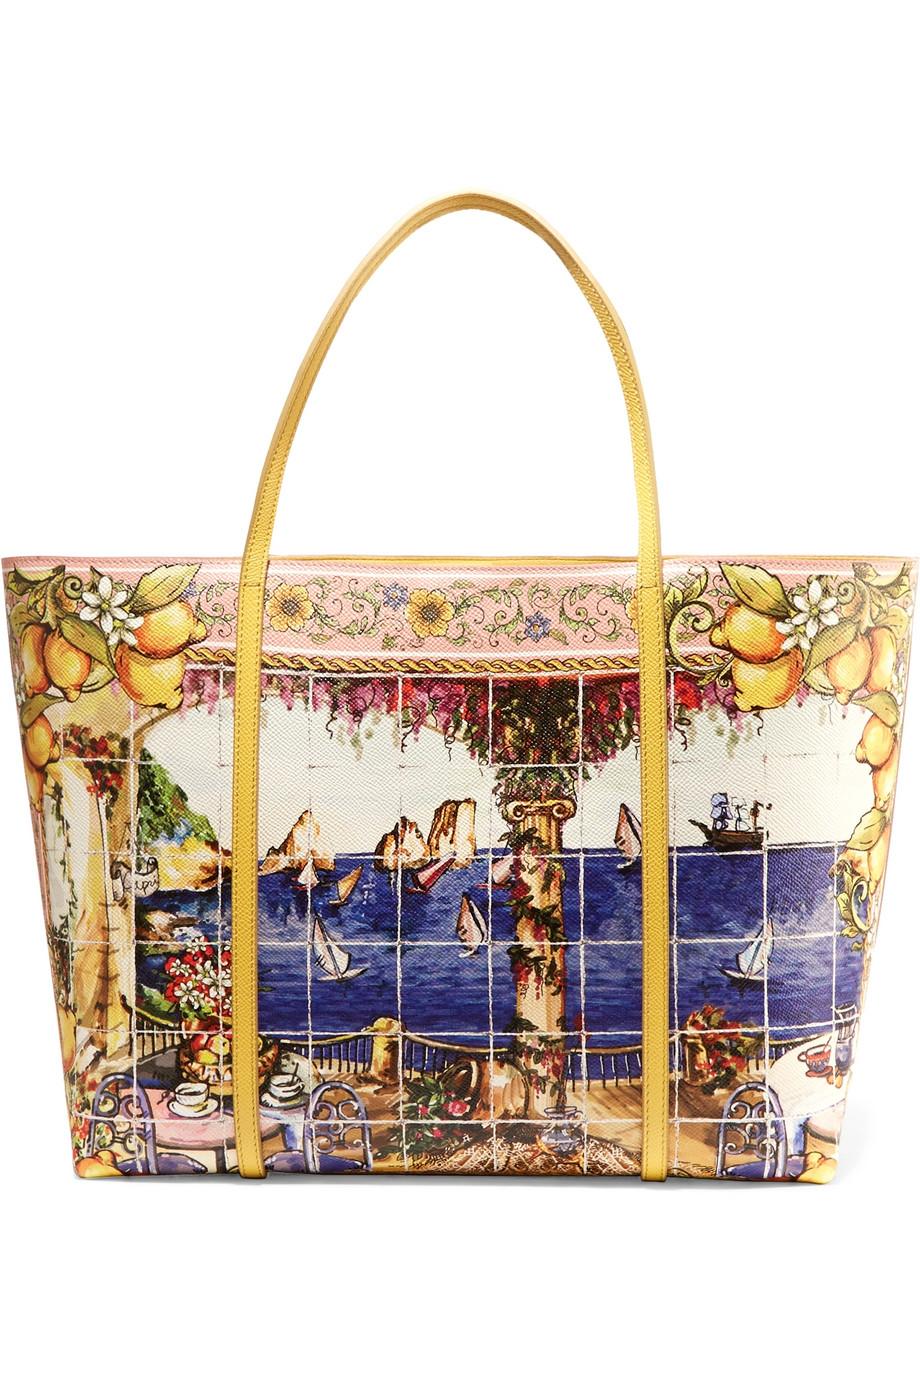 Dolce & Gabbana Printed Textured-leather Tote | ModeSens